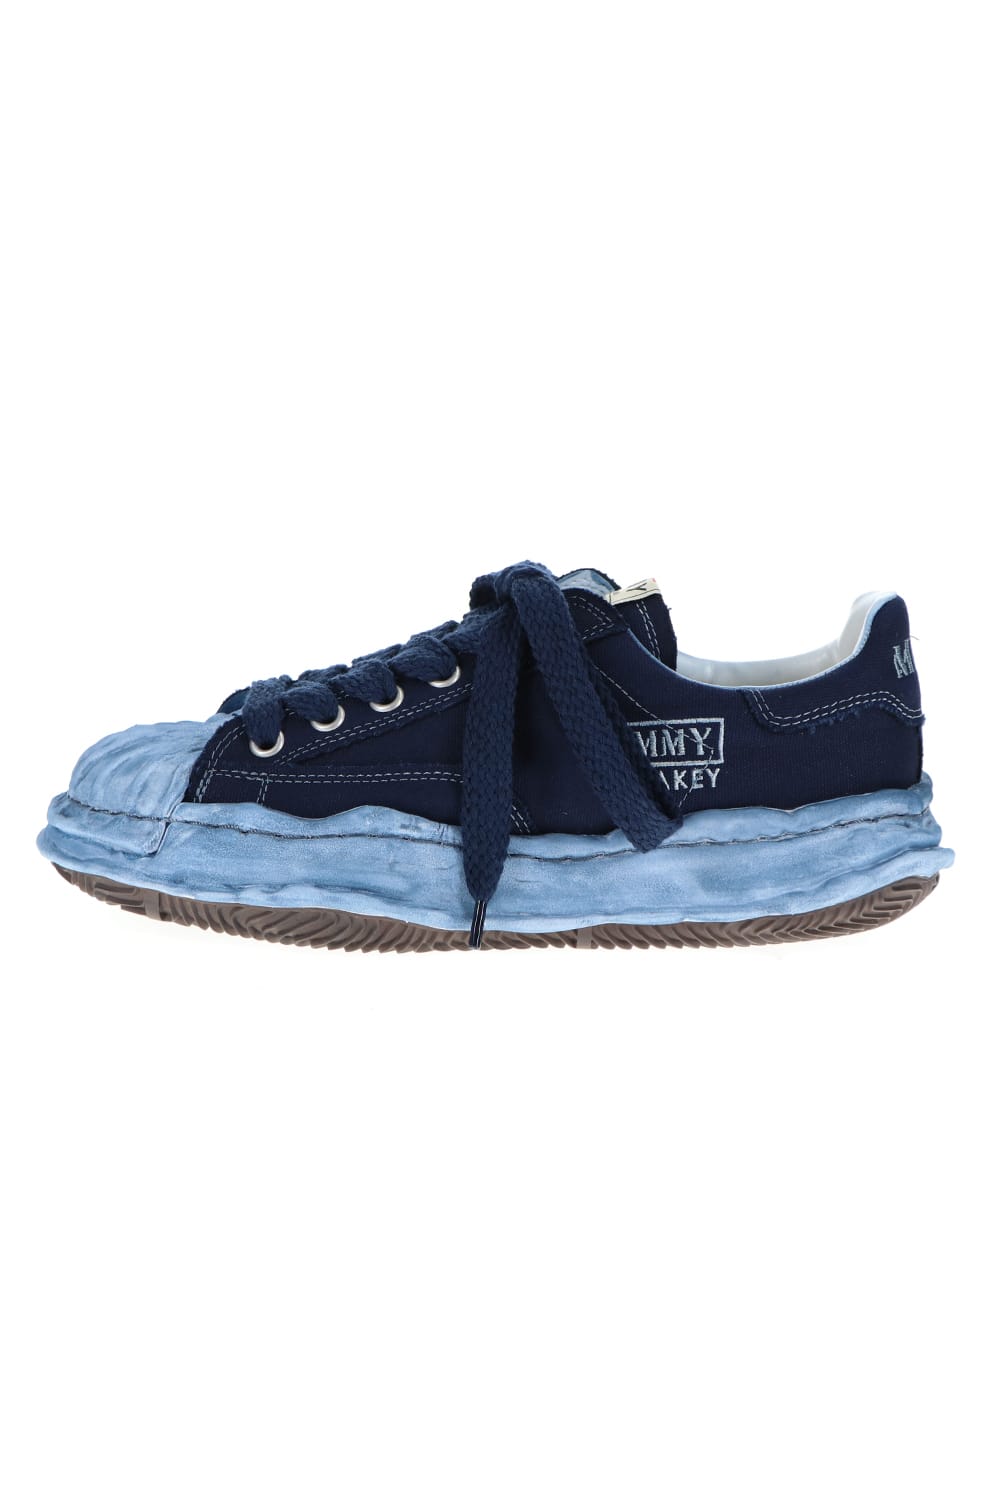 -BLAKEY Low- Original STC sole over dyed canvas Low-Top sneakers Navy